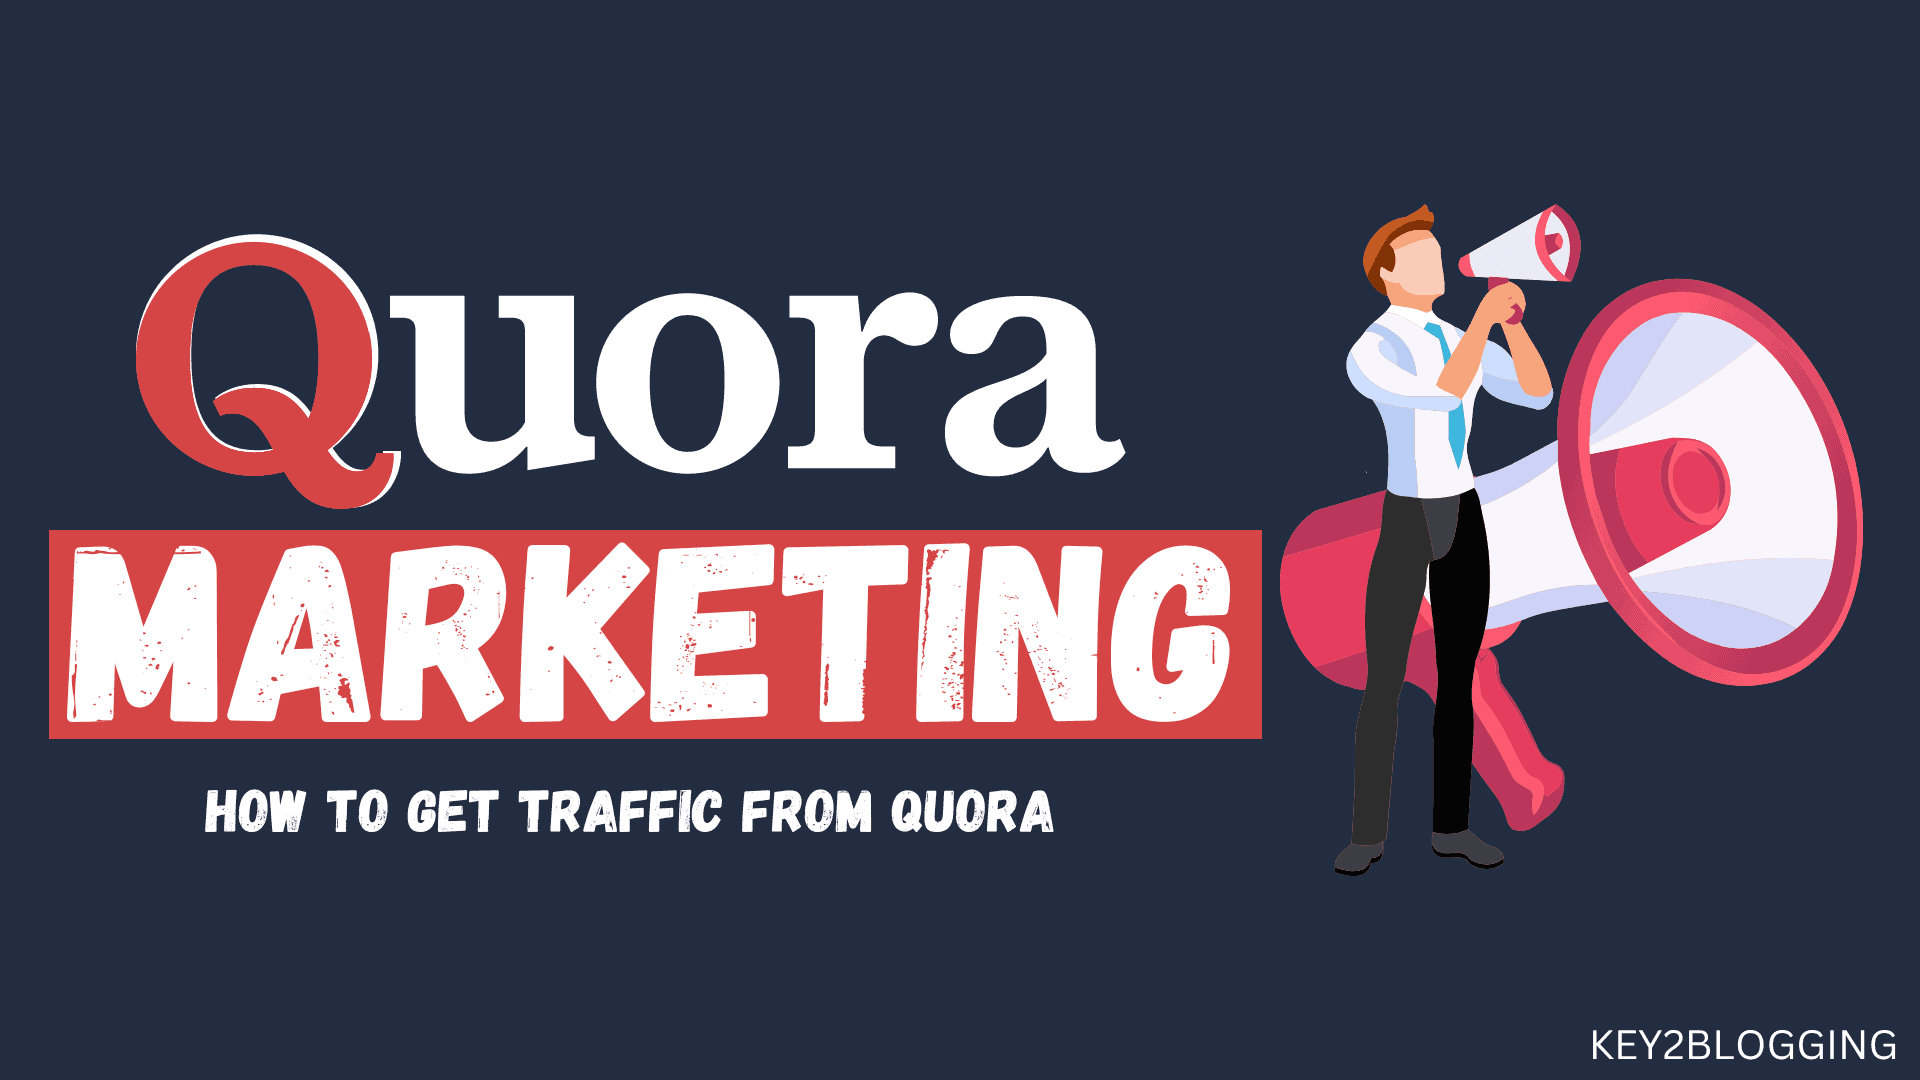 Quora Marketing How to Get Traffic From Quora